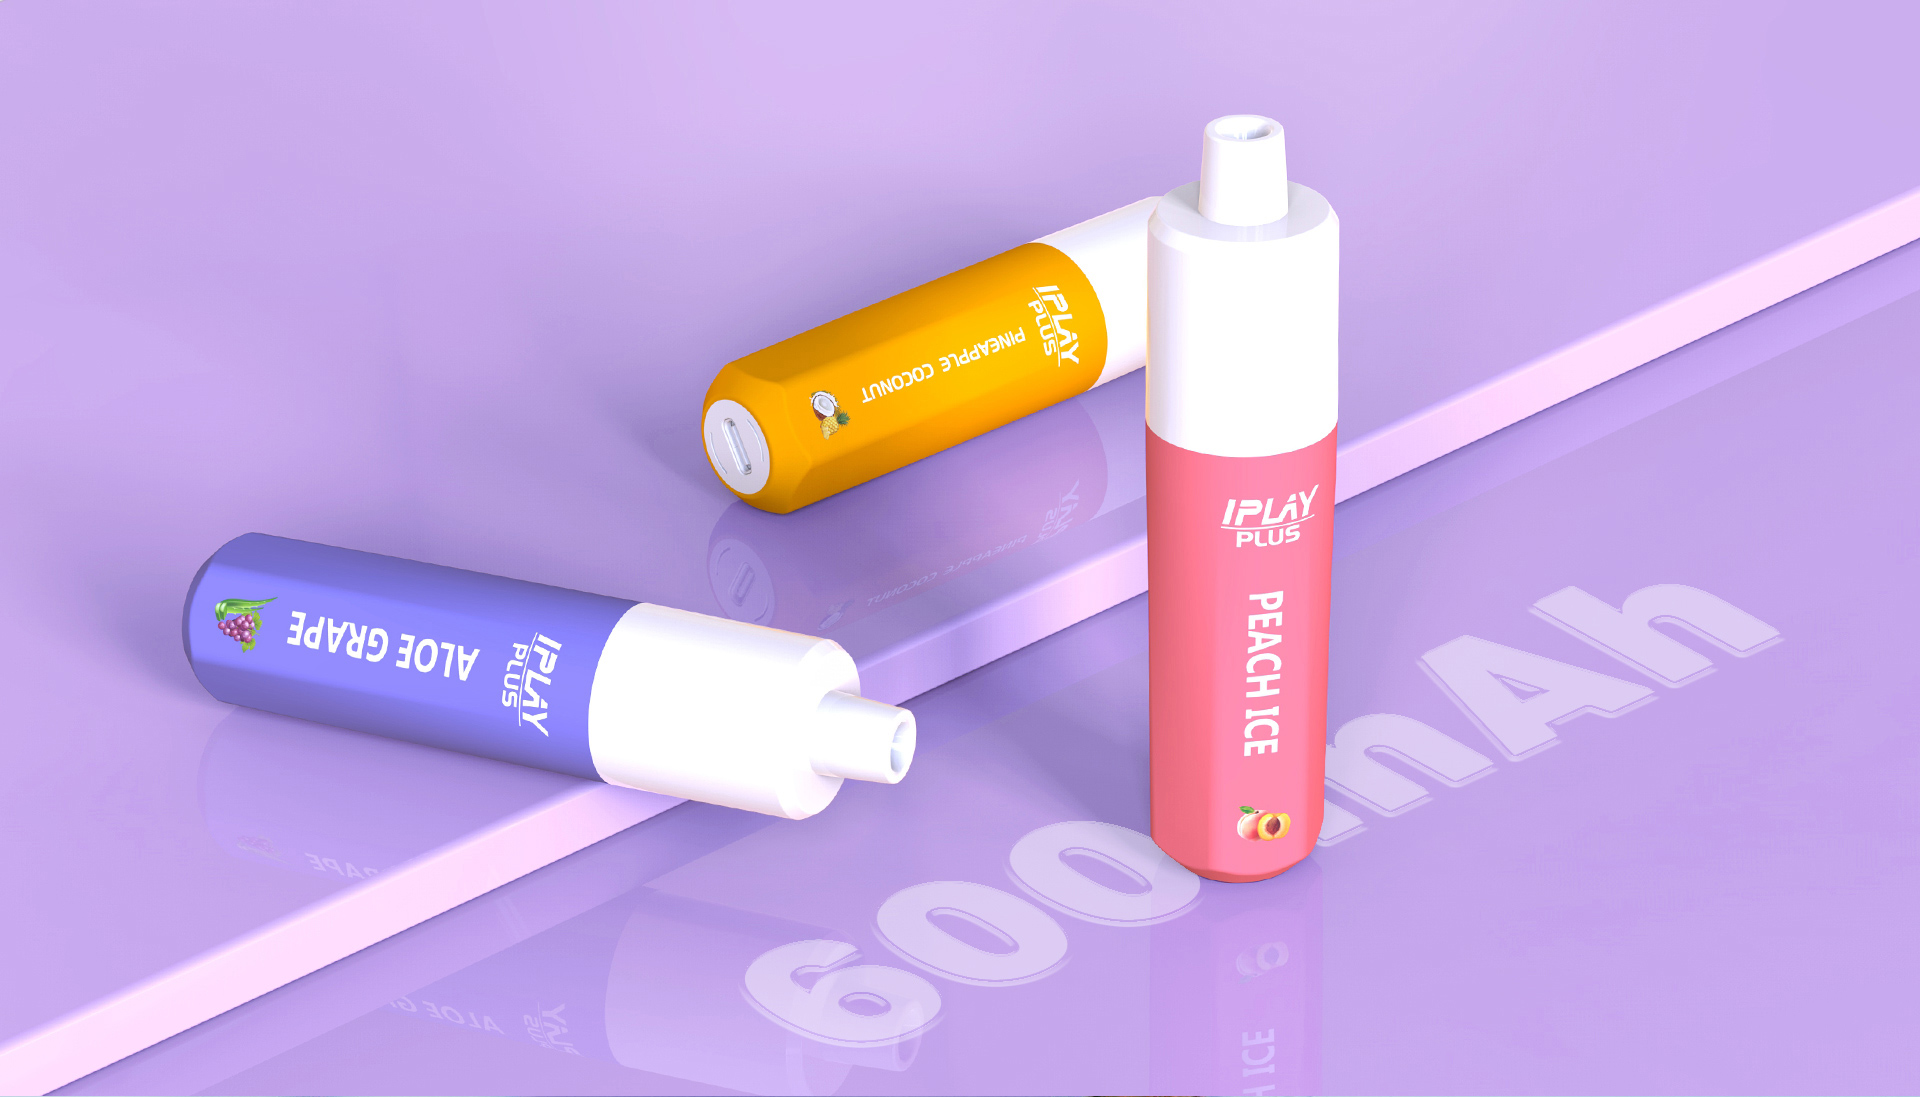 IPLAY PLUS DISPOSABLE VAPE - 400mAh RECHARGEABLE BATTERY